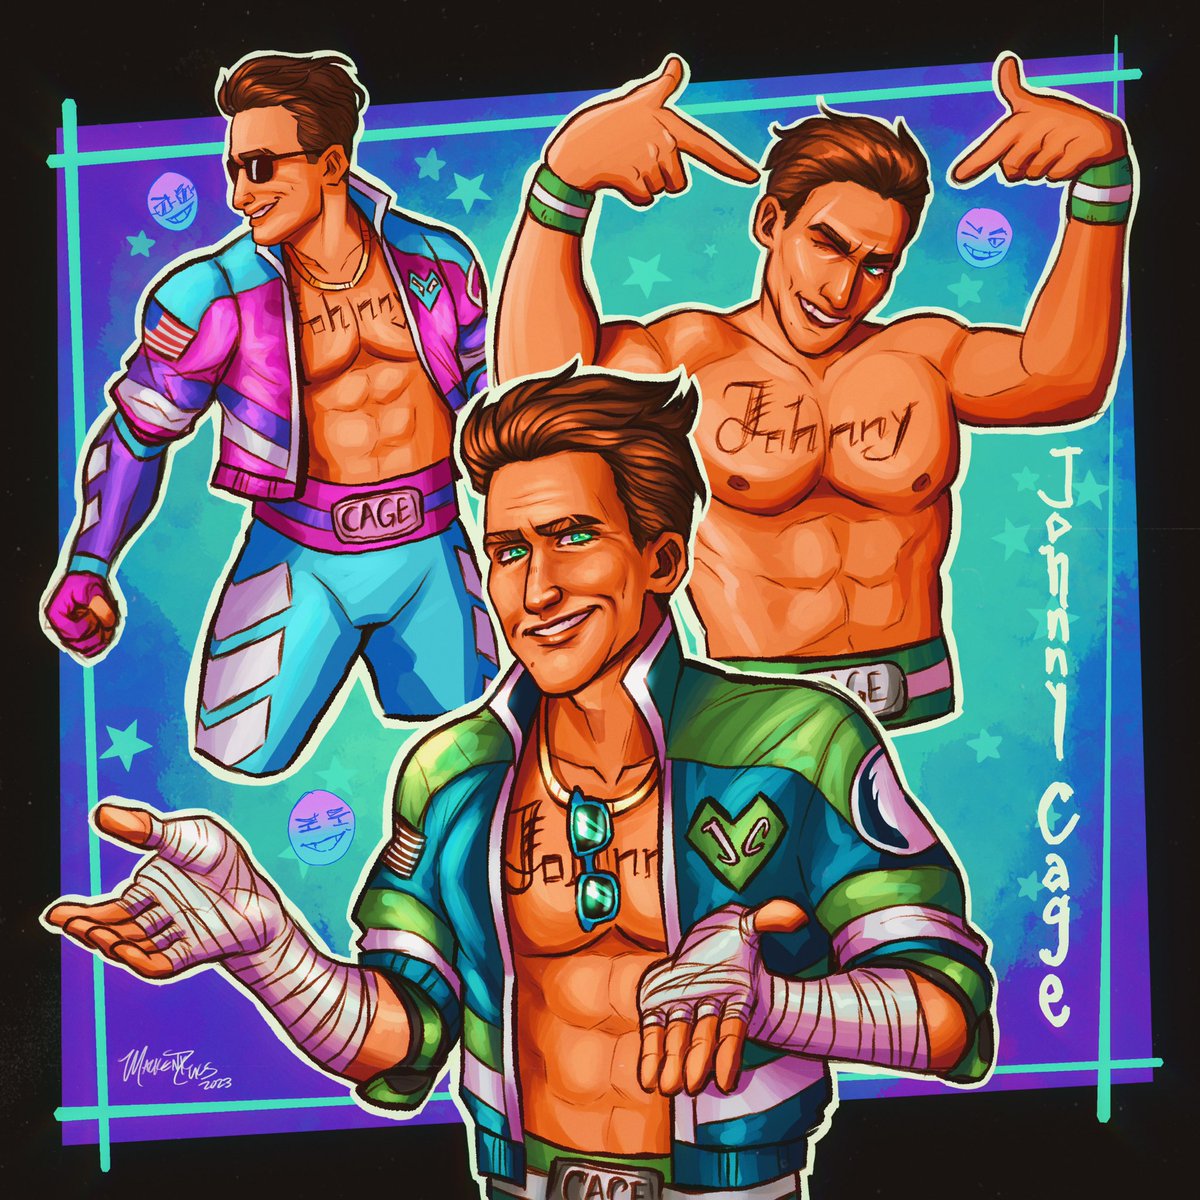 Here is my design for Johnny Cage! Check out the thread for close ups, sketches, and line work! #JohnnyCage #MortalKombat #MortalKombat1 #MortalKombat12 #mortalkombatfanart